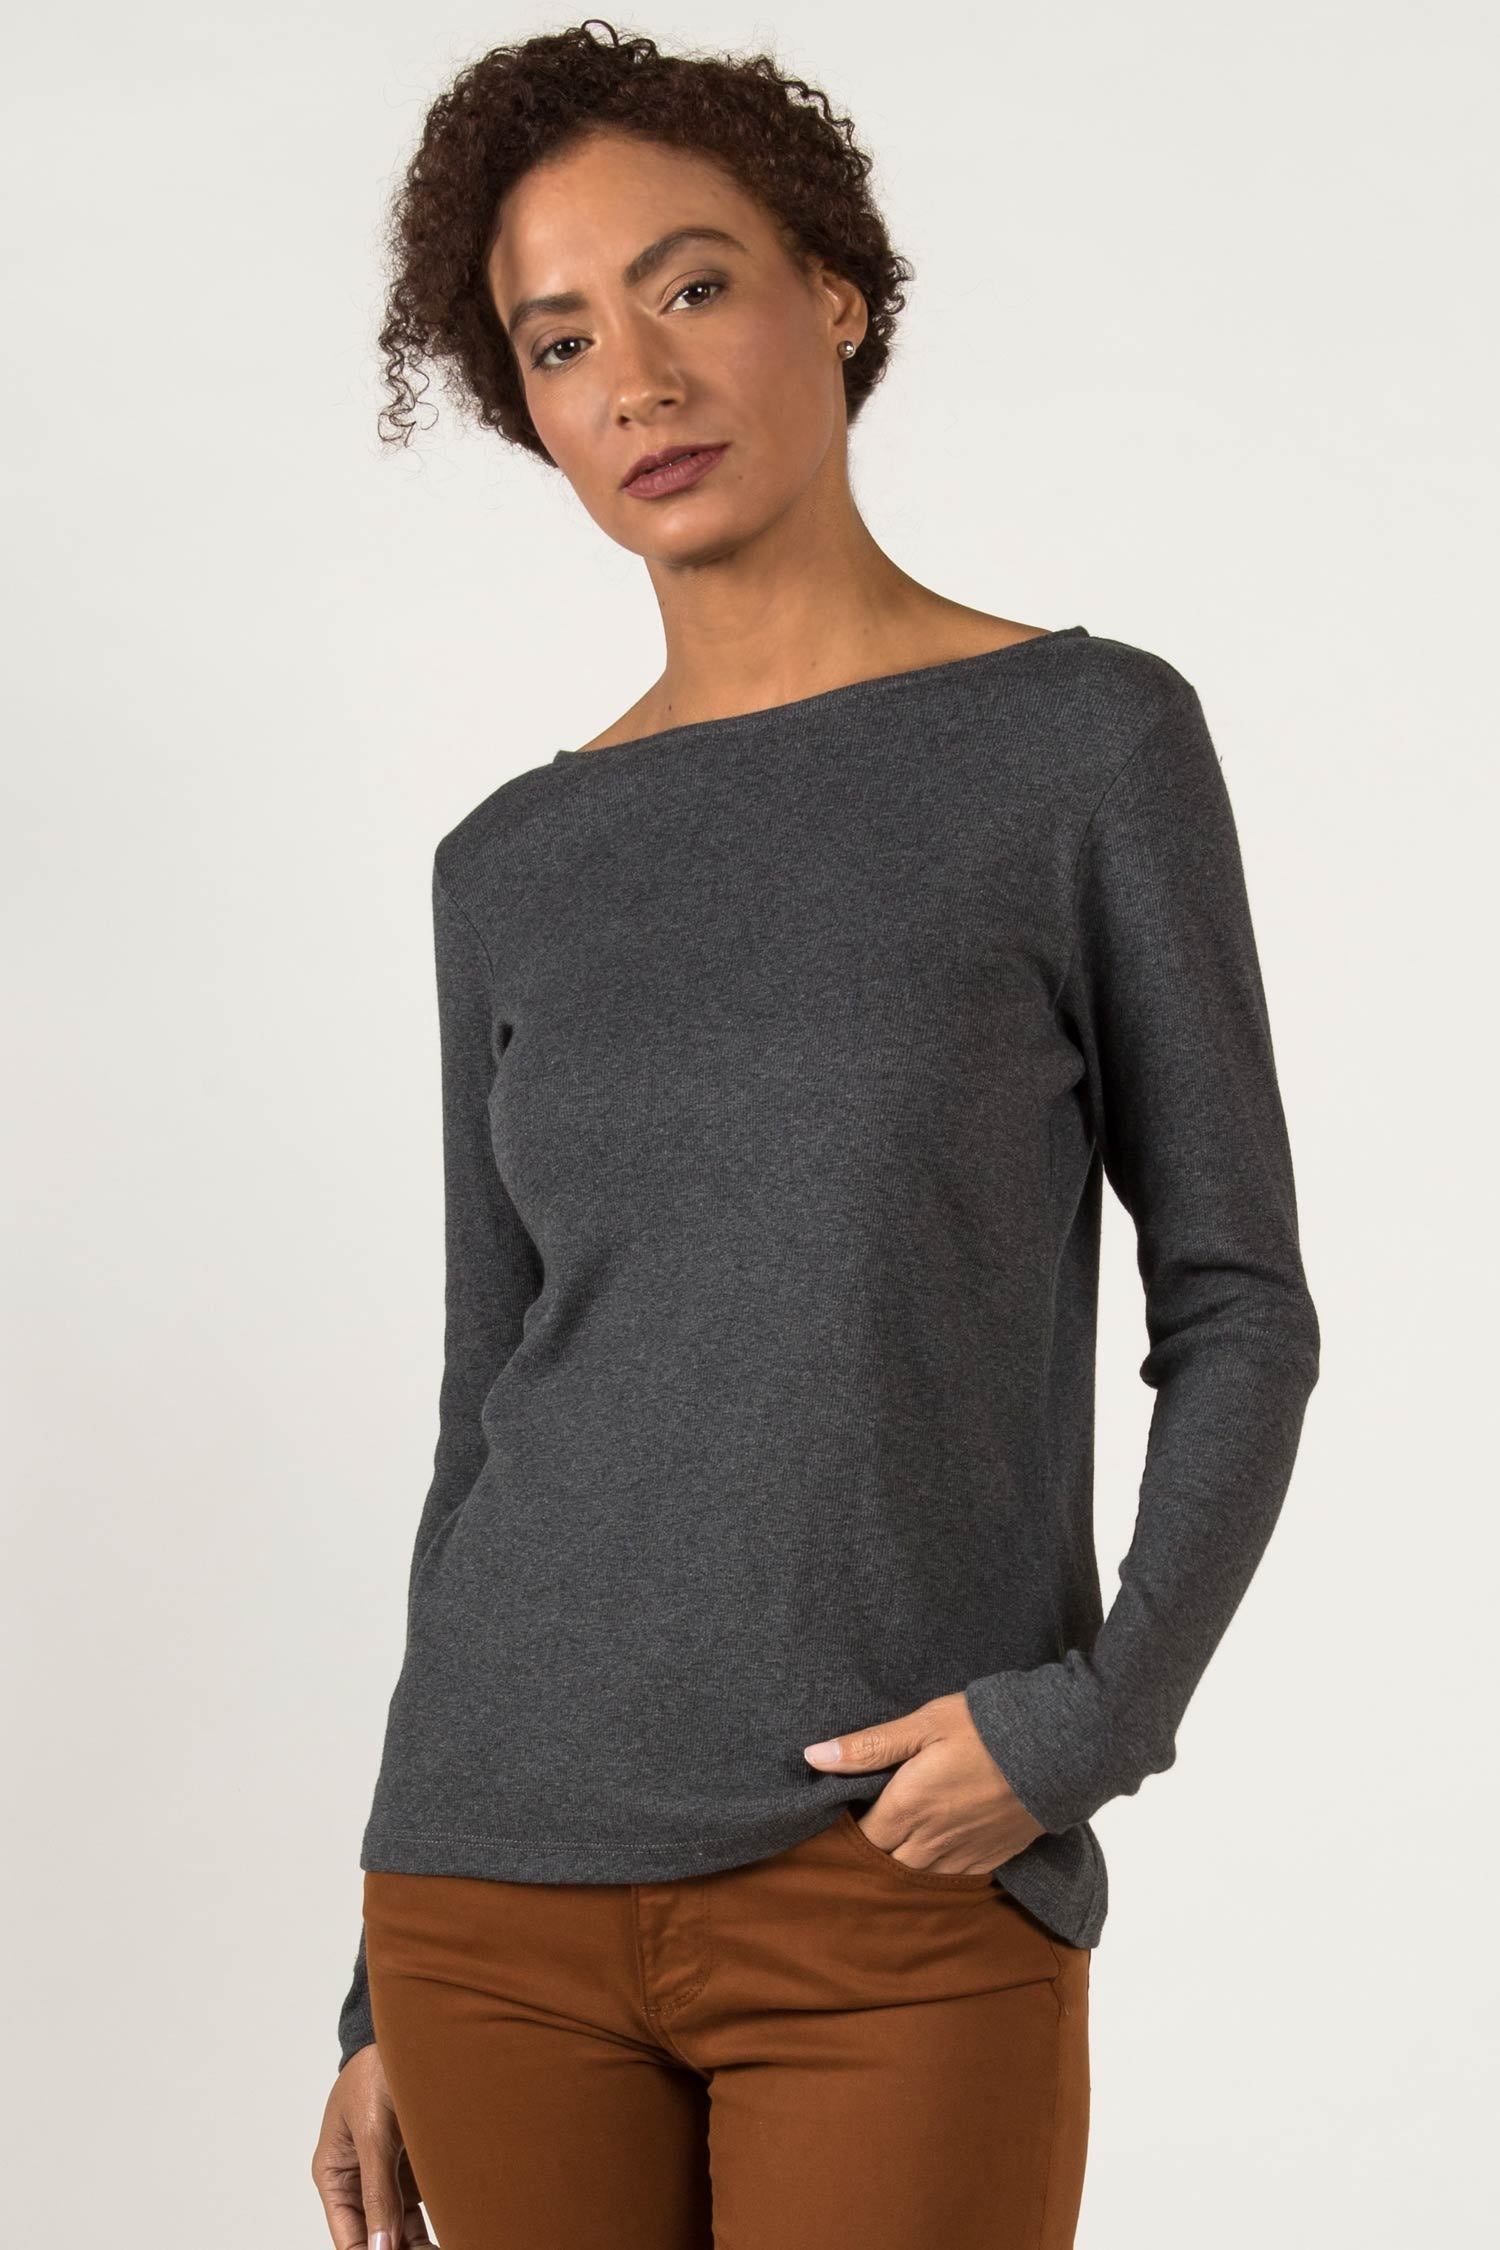 Womens Organic Cotton Top | Gray Long Sleeve Boatneck Tee | Indigenous